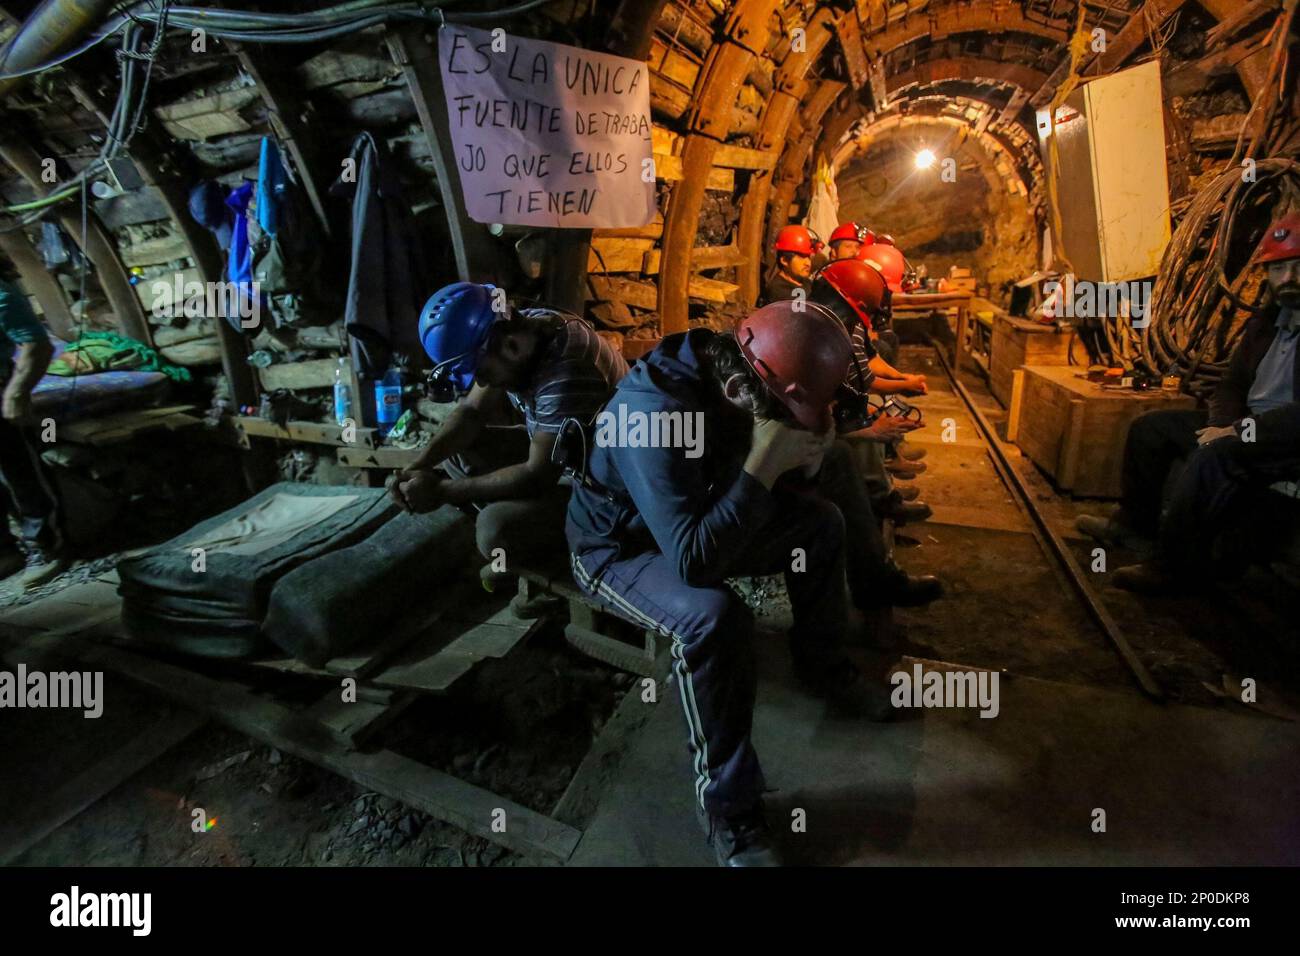 Miners sit during a protest in the Santa Ana mine, some 650 meters (2,100  feet) underground, in Curanilahue, southern Chile, on Saturday, Dec. 31,  2016. More than 60 coal miners have occupied